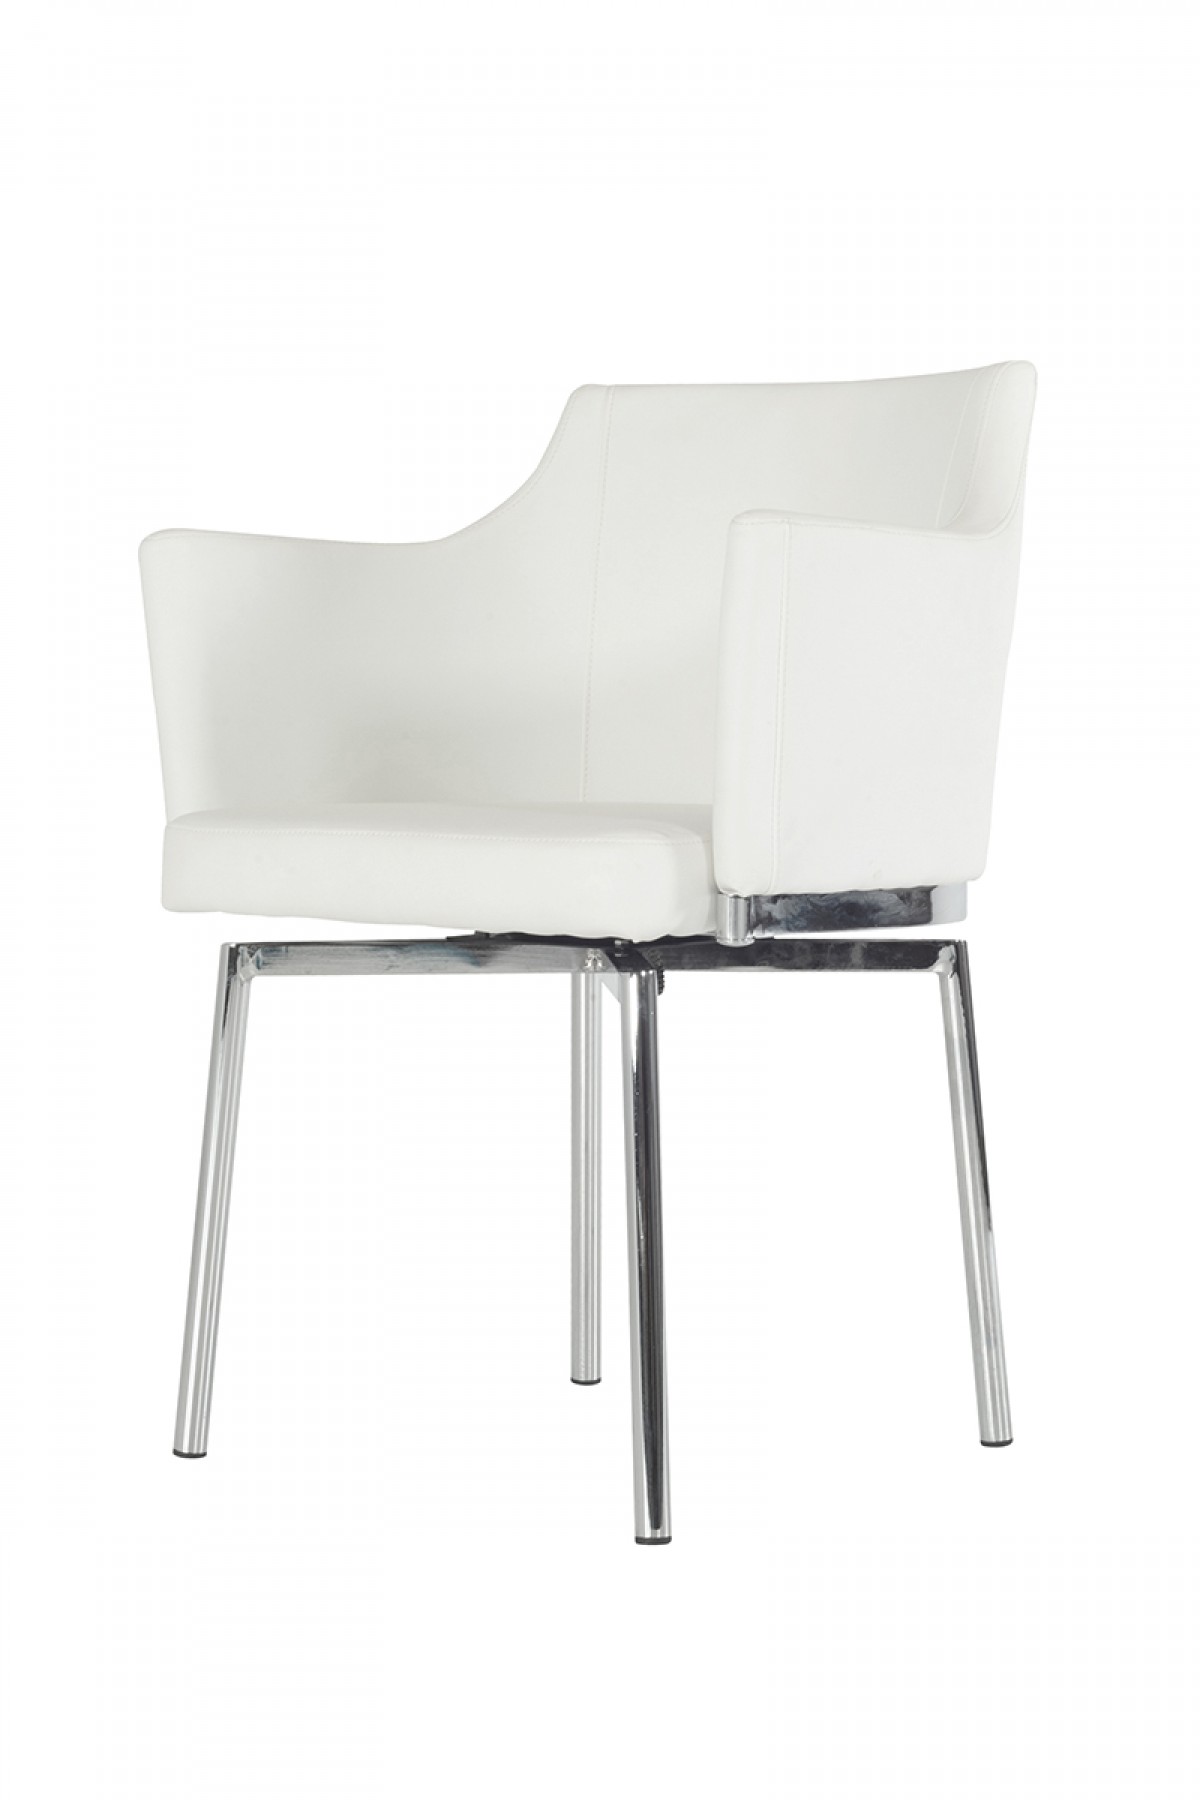 Check out the brand new Cynthia White Swivel Dining Chair at AdvancedInteriorDesigns.com